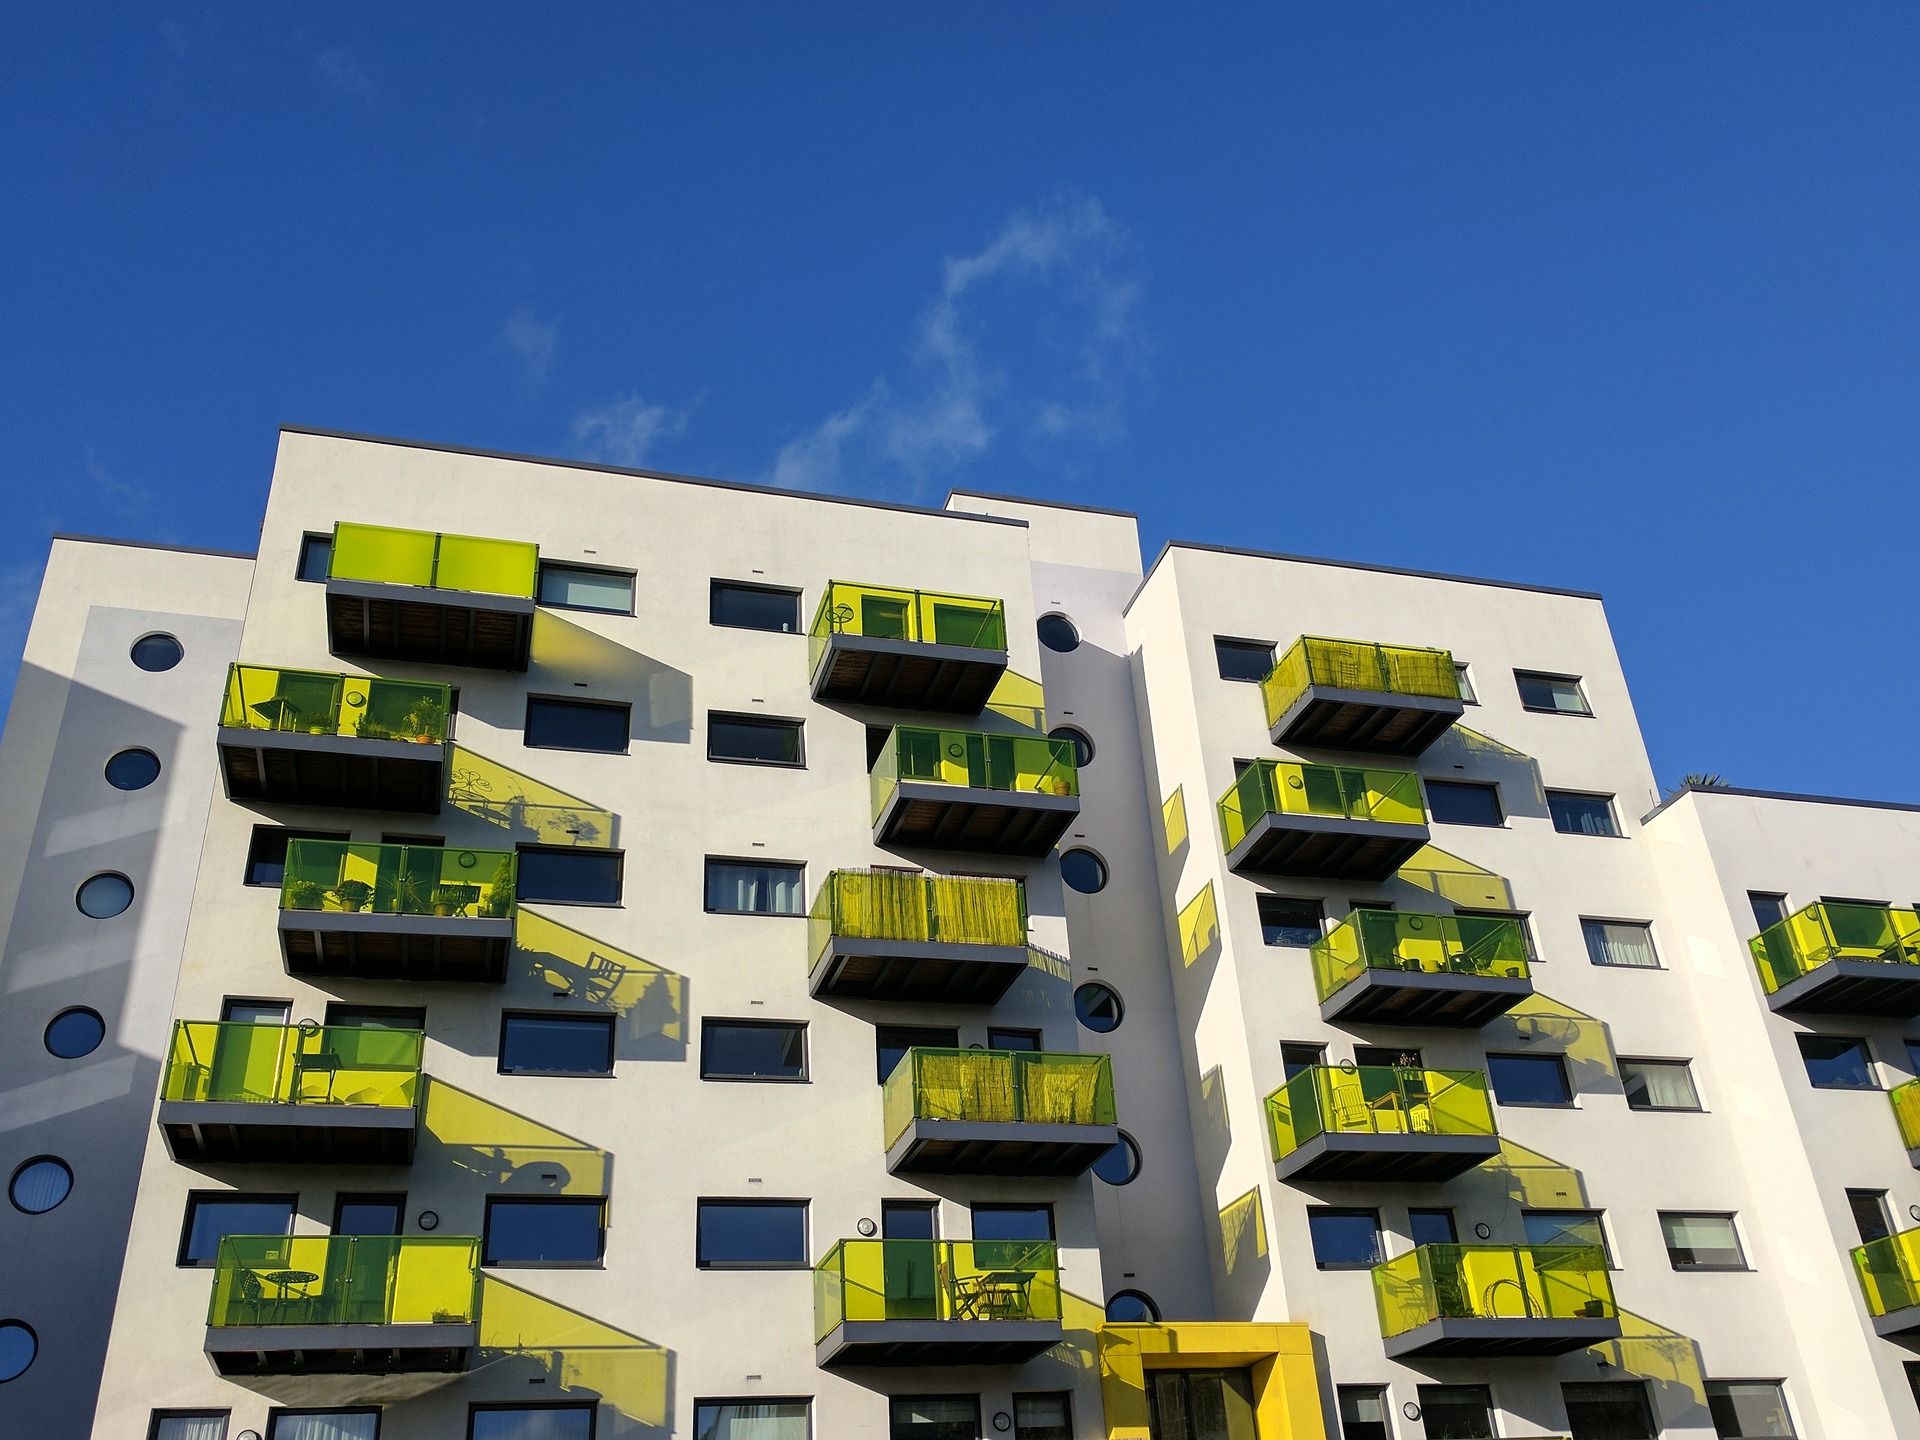 Block of flats in England with green glass balconies set against a blue sky